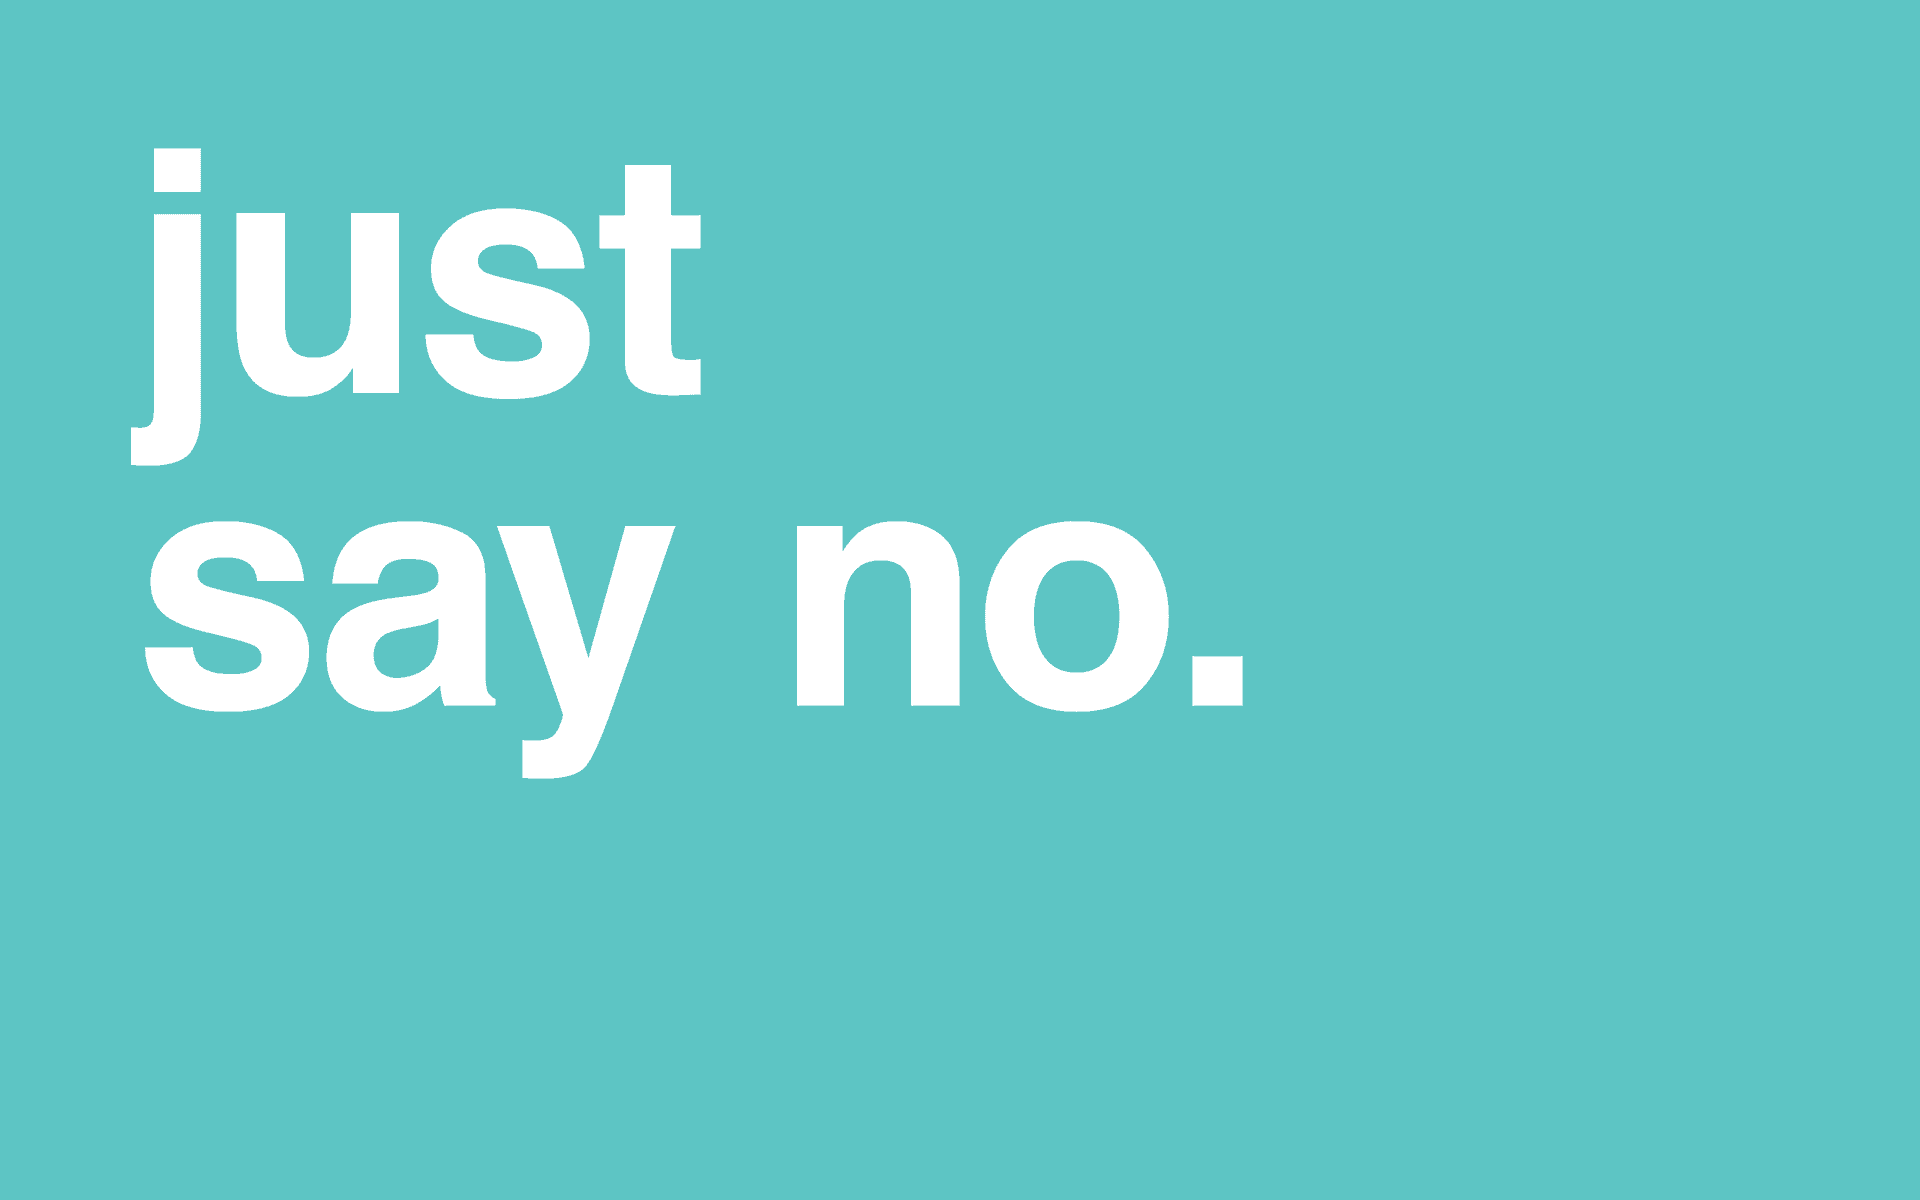 Just Say No - A Blue Background With White Text